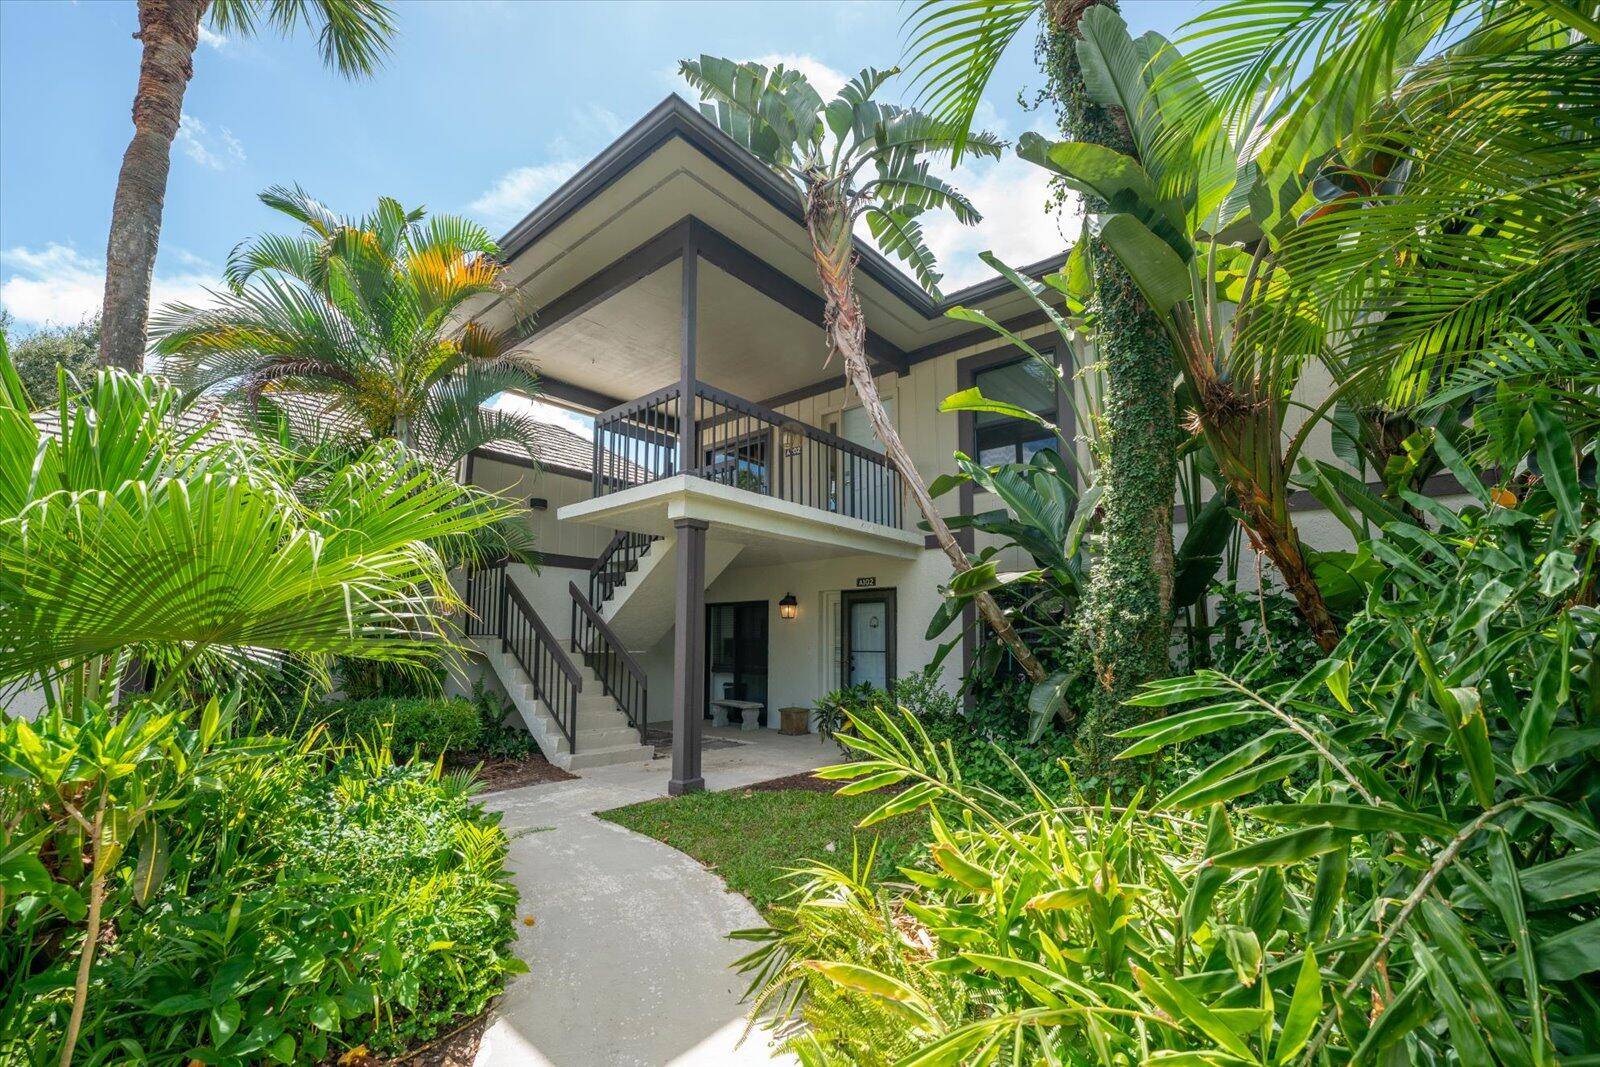 Remarkable 3 bedroom, 3 bath 2nd story condo in Meadowbrook of Palm Beach Polo.